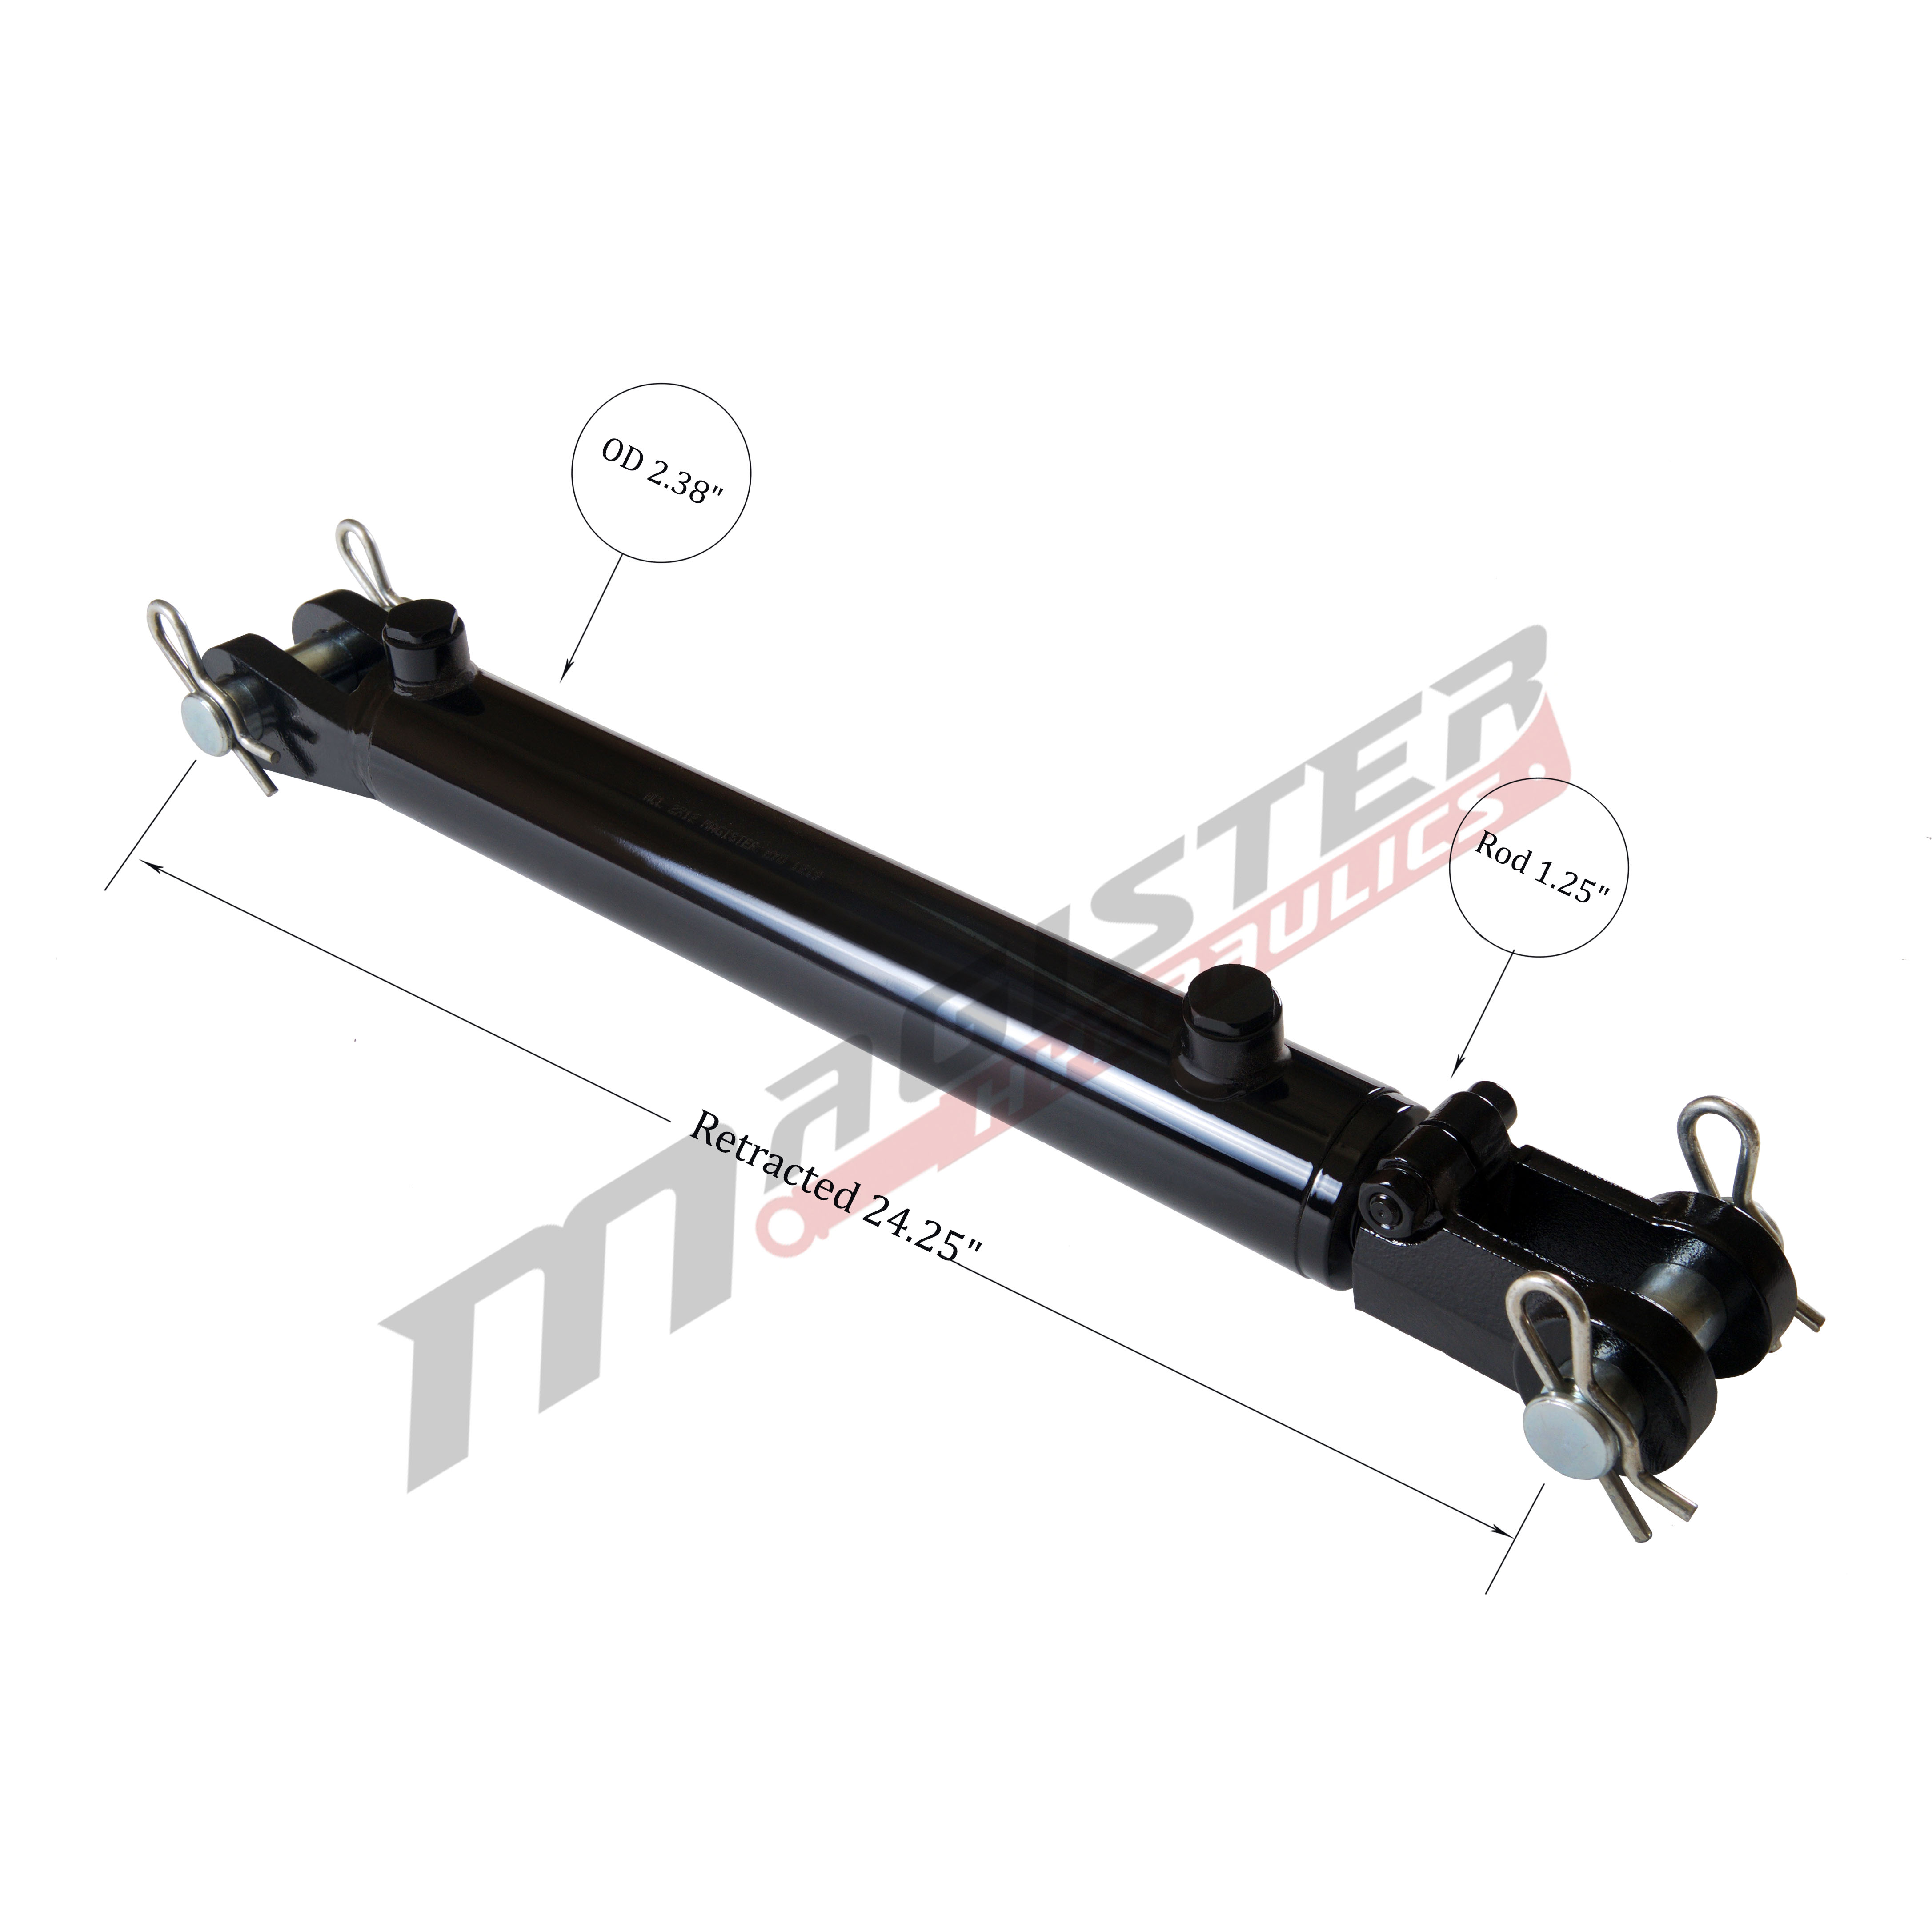 2 bore x 14 stroke hydraulic cylinder, welded clevis double acting cylinder | Magister Hydraulics